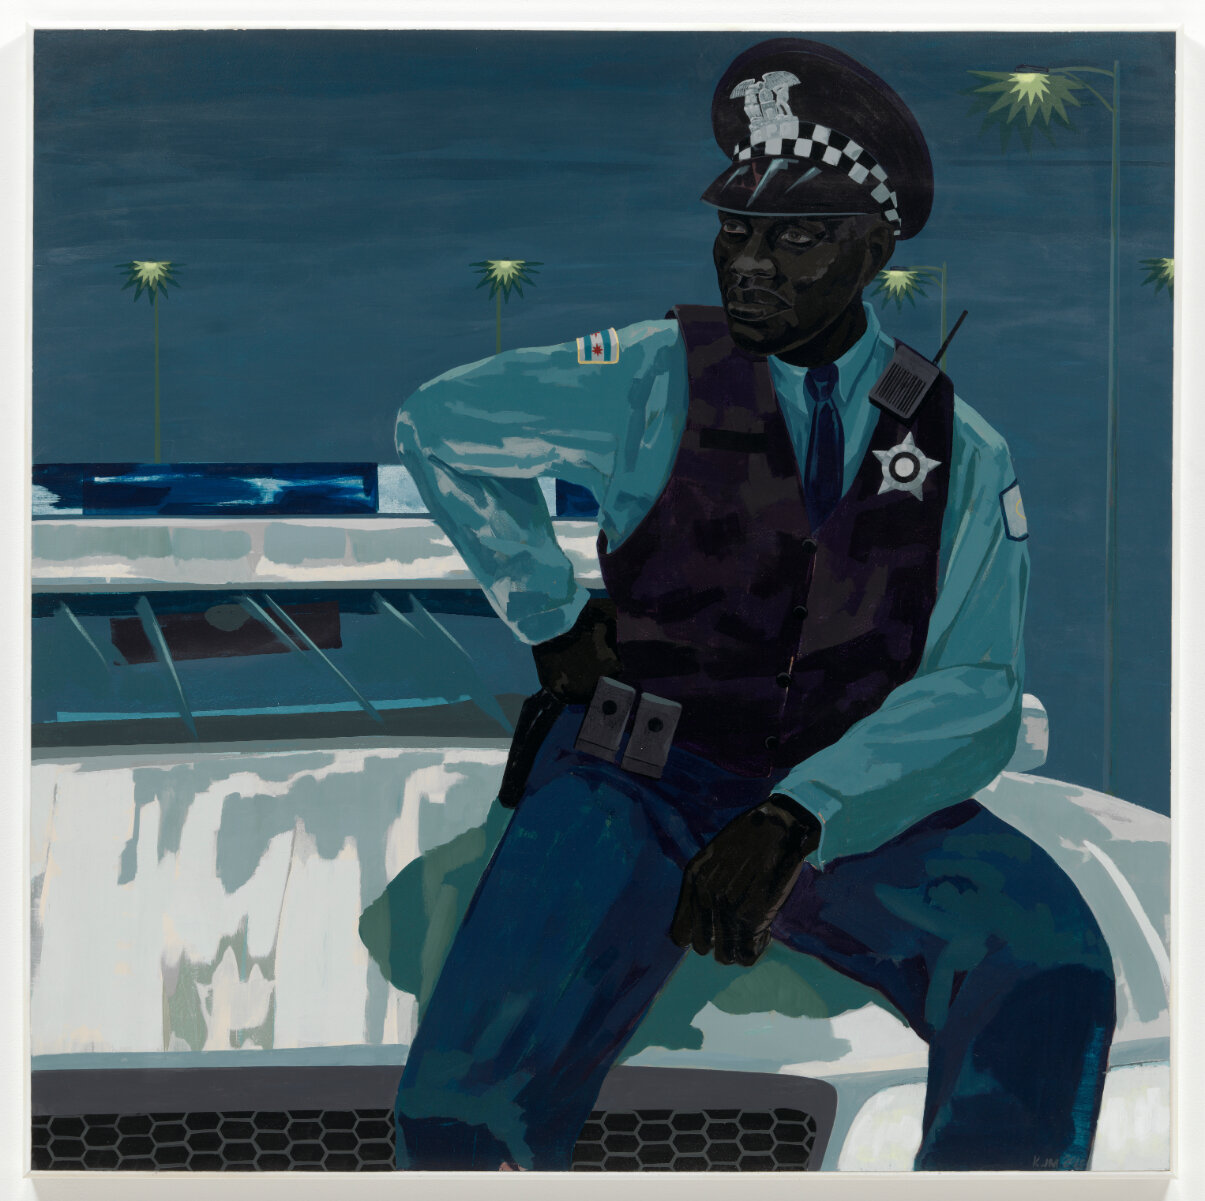  Kerry James Marshall  Untitled (policeman) , 2015 Acrylic on PVC panel with plexiglass frame 60 x 60 in (152.4 x 152.4 cm) Museum of Modern Art, Gift of Mimi Haas in honor of Marie-Josée Kravis. © Kerry James Marshall. Courtesy the artist and Jack S